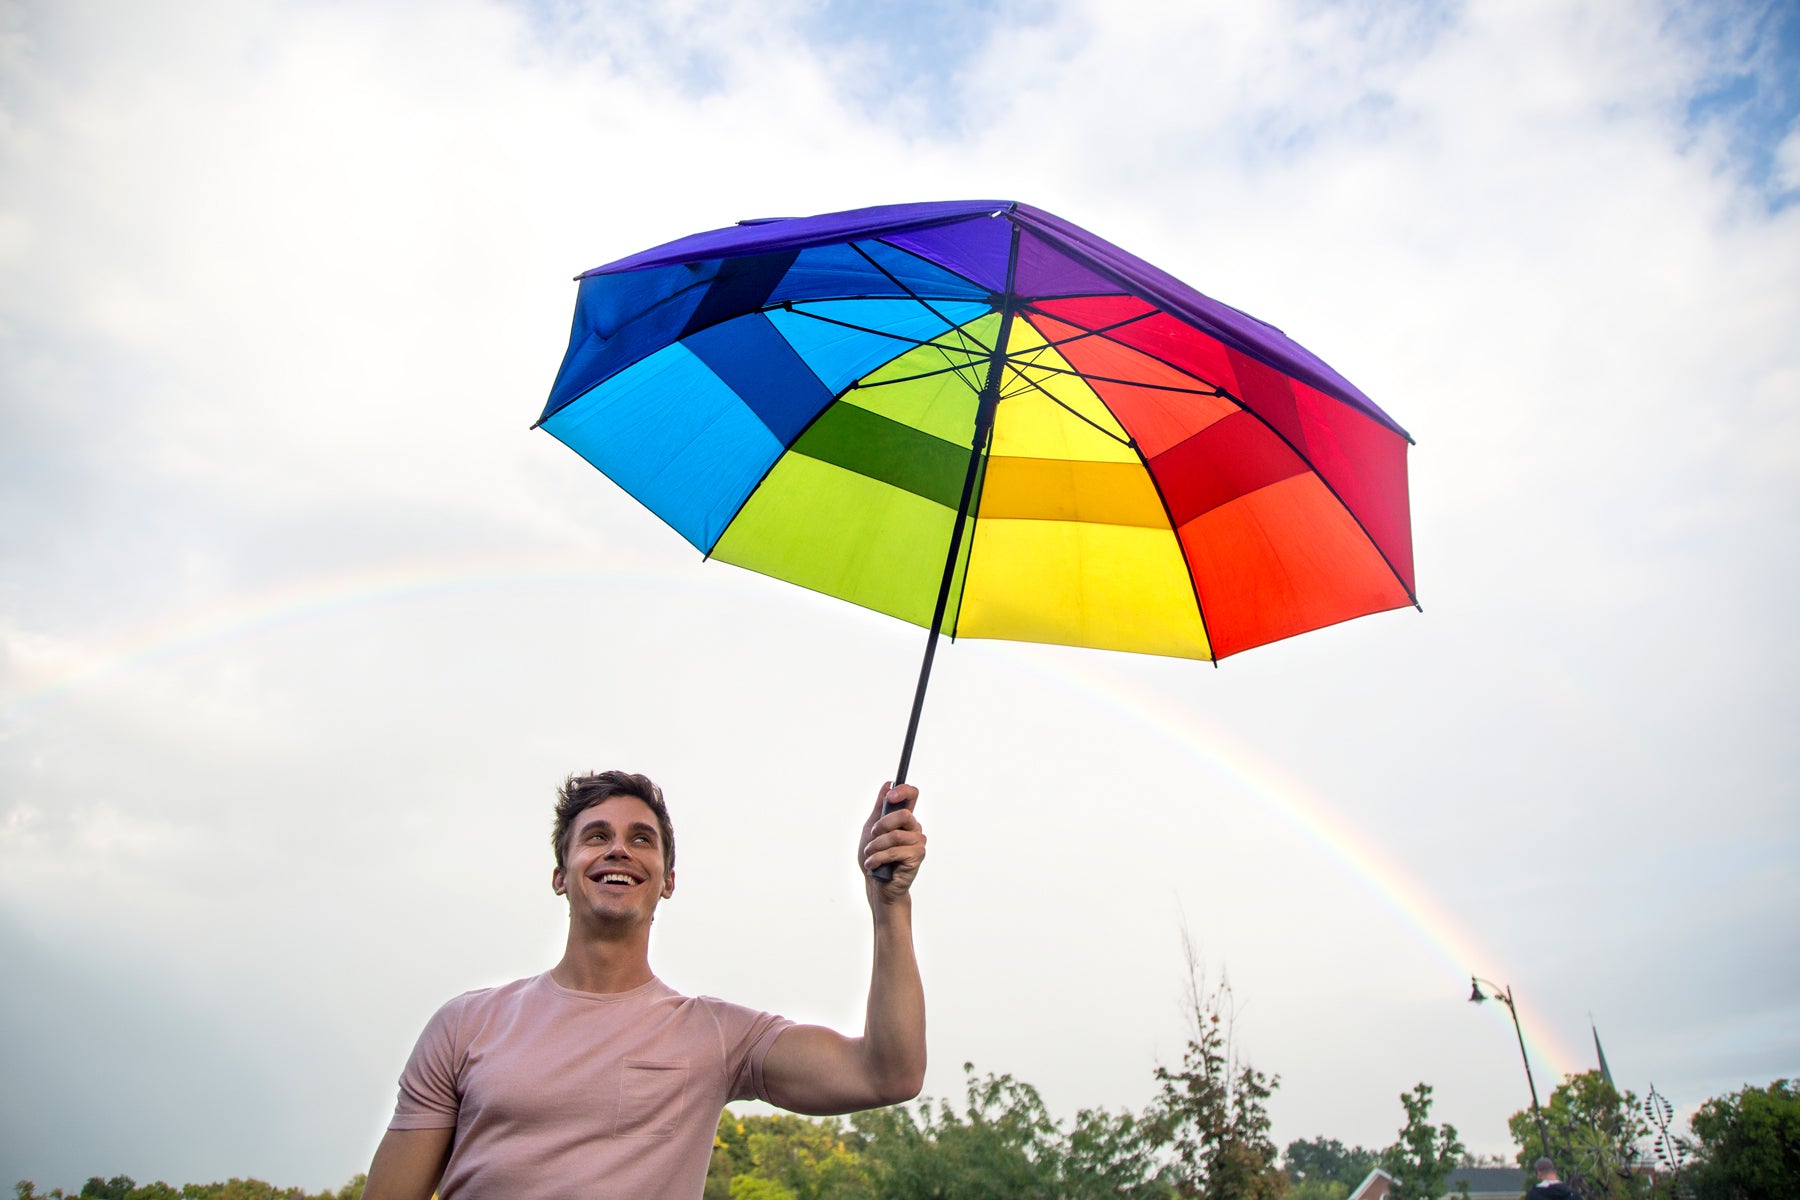 Antoni holds a rainbow umbrella against a sky with a rainbow in an episode of Queer Eye.